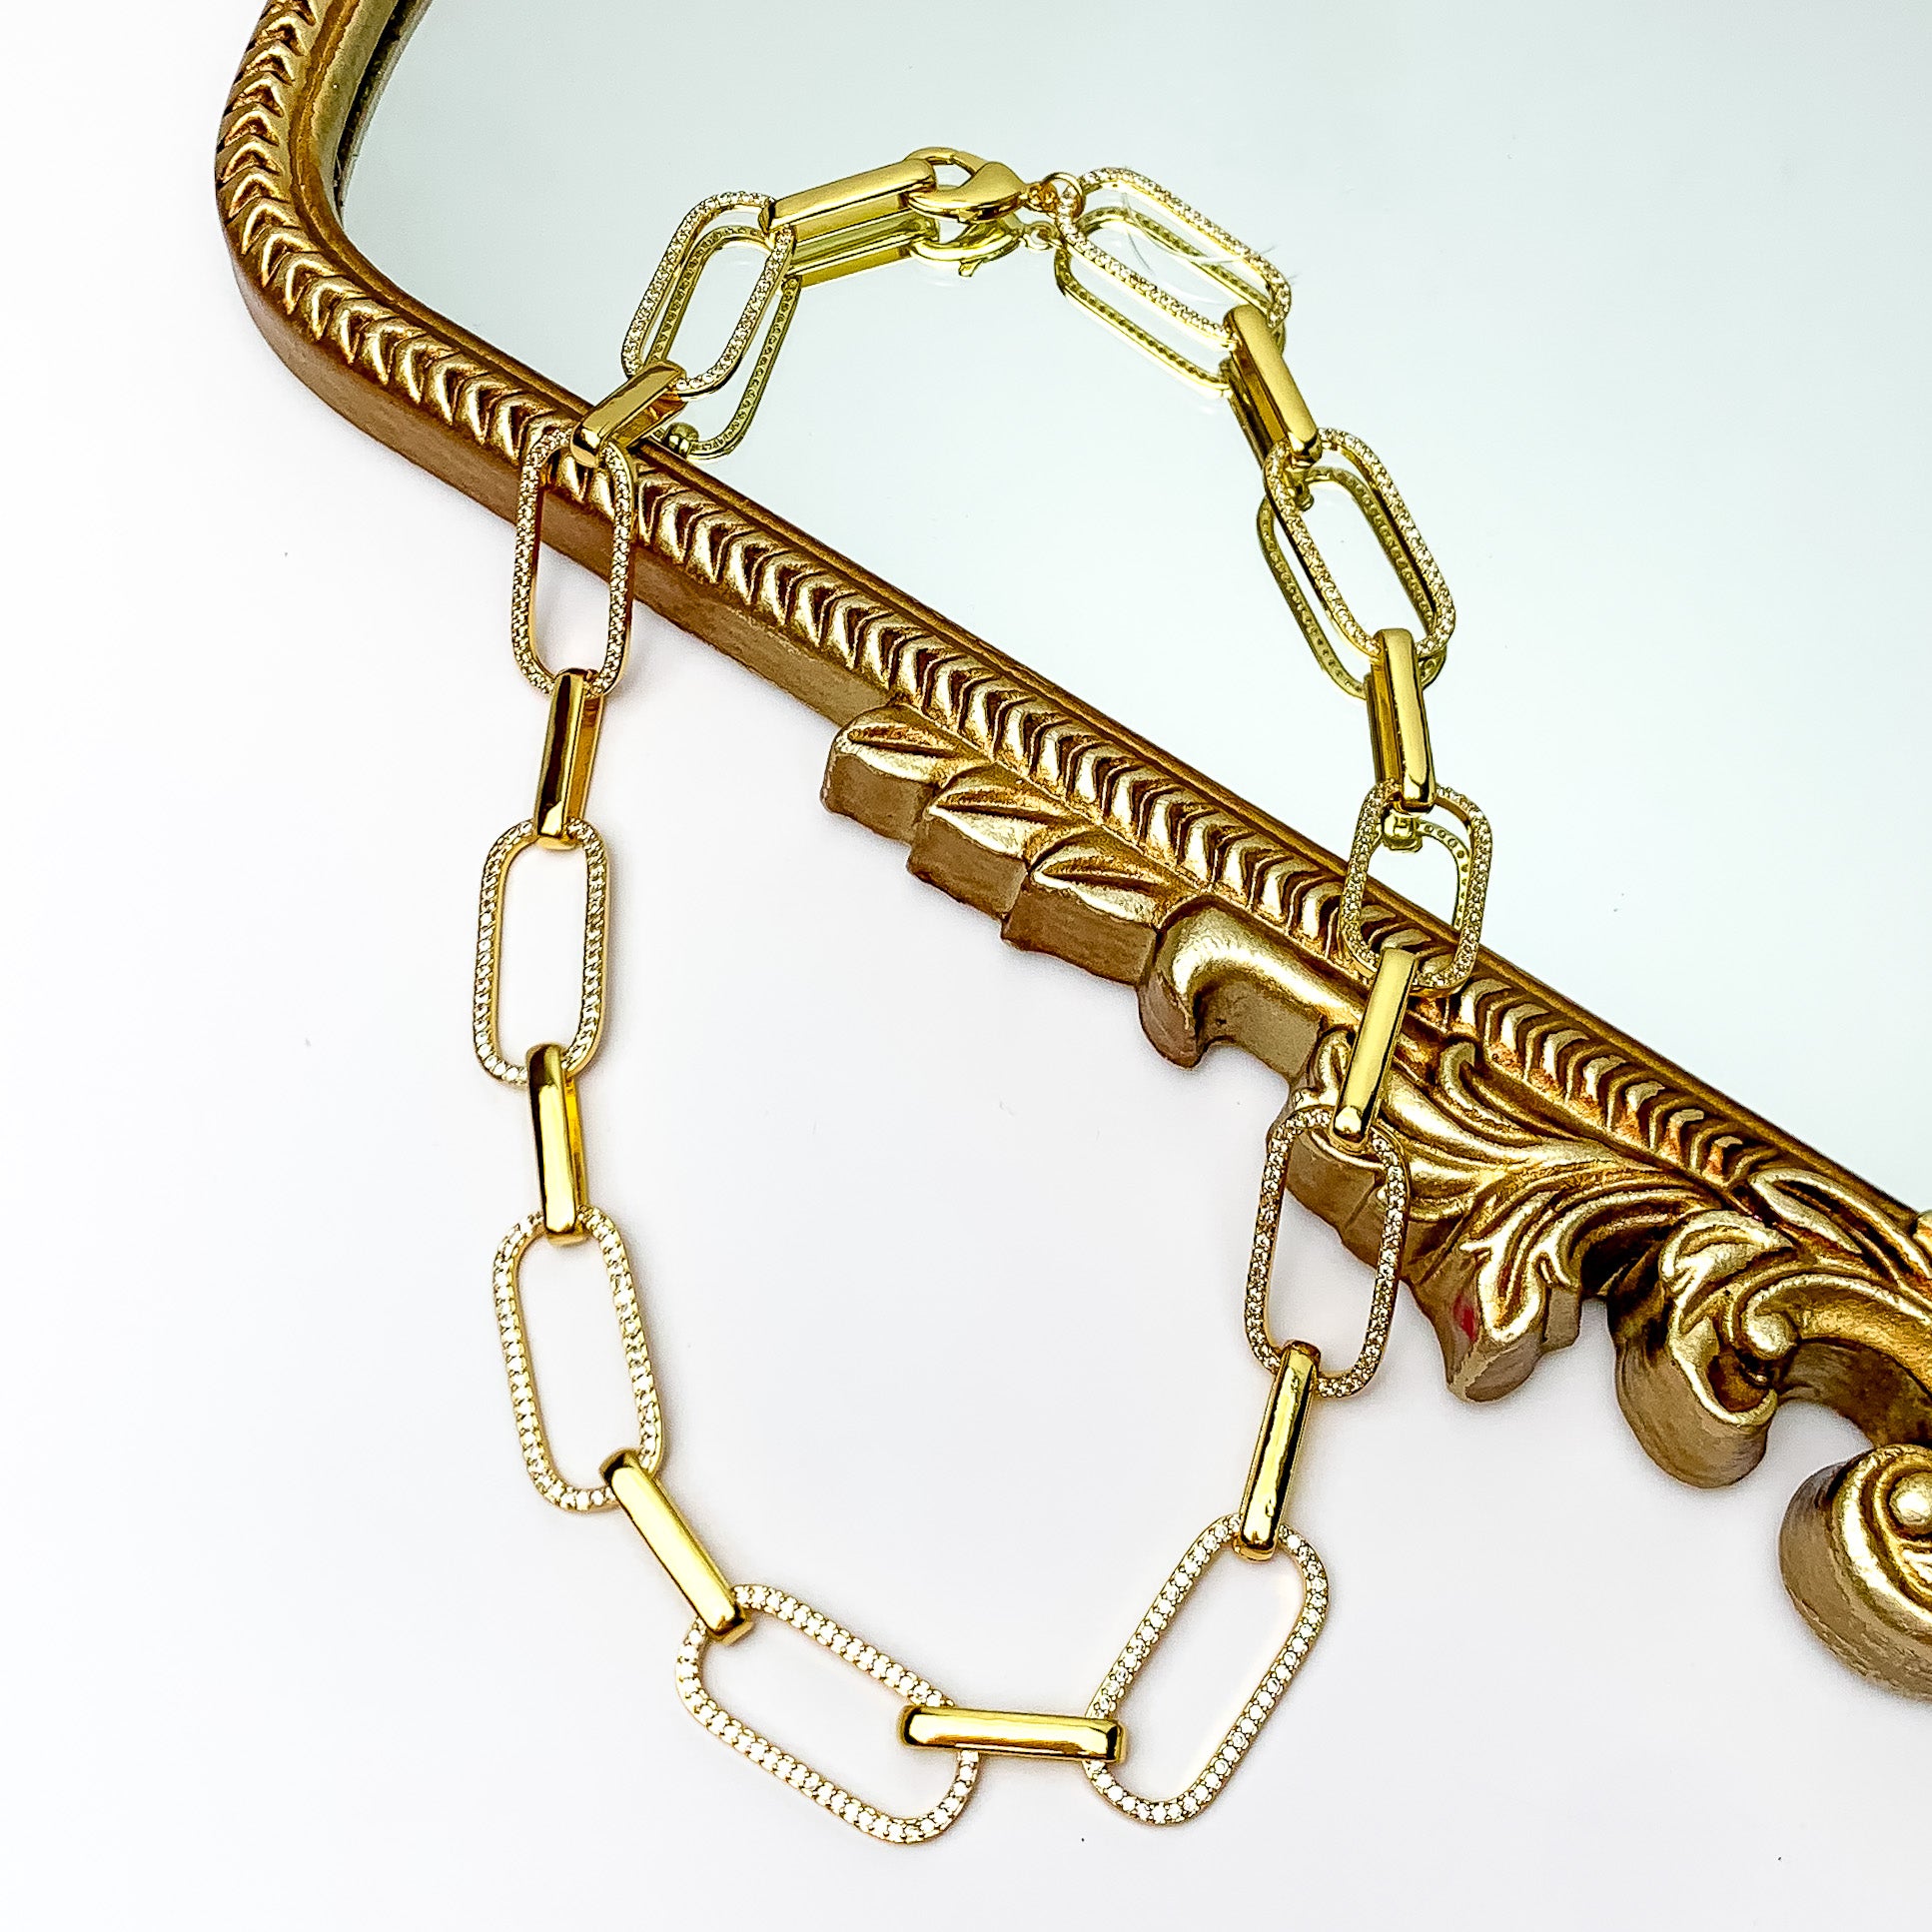 Pictured is a gold chain necklace with alternating chains encrusted with clear crystals. This necklace is pictured partially laying on a gold mirror on a white background.  